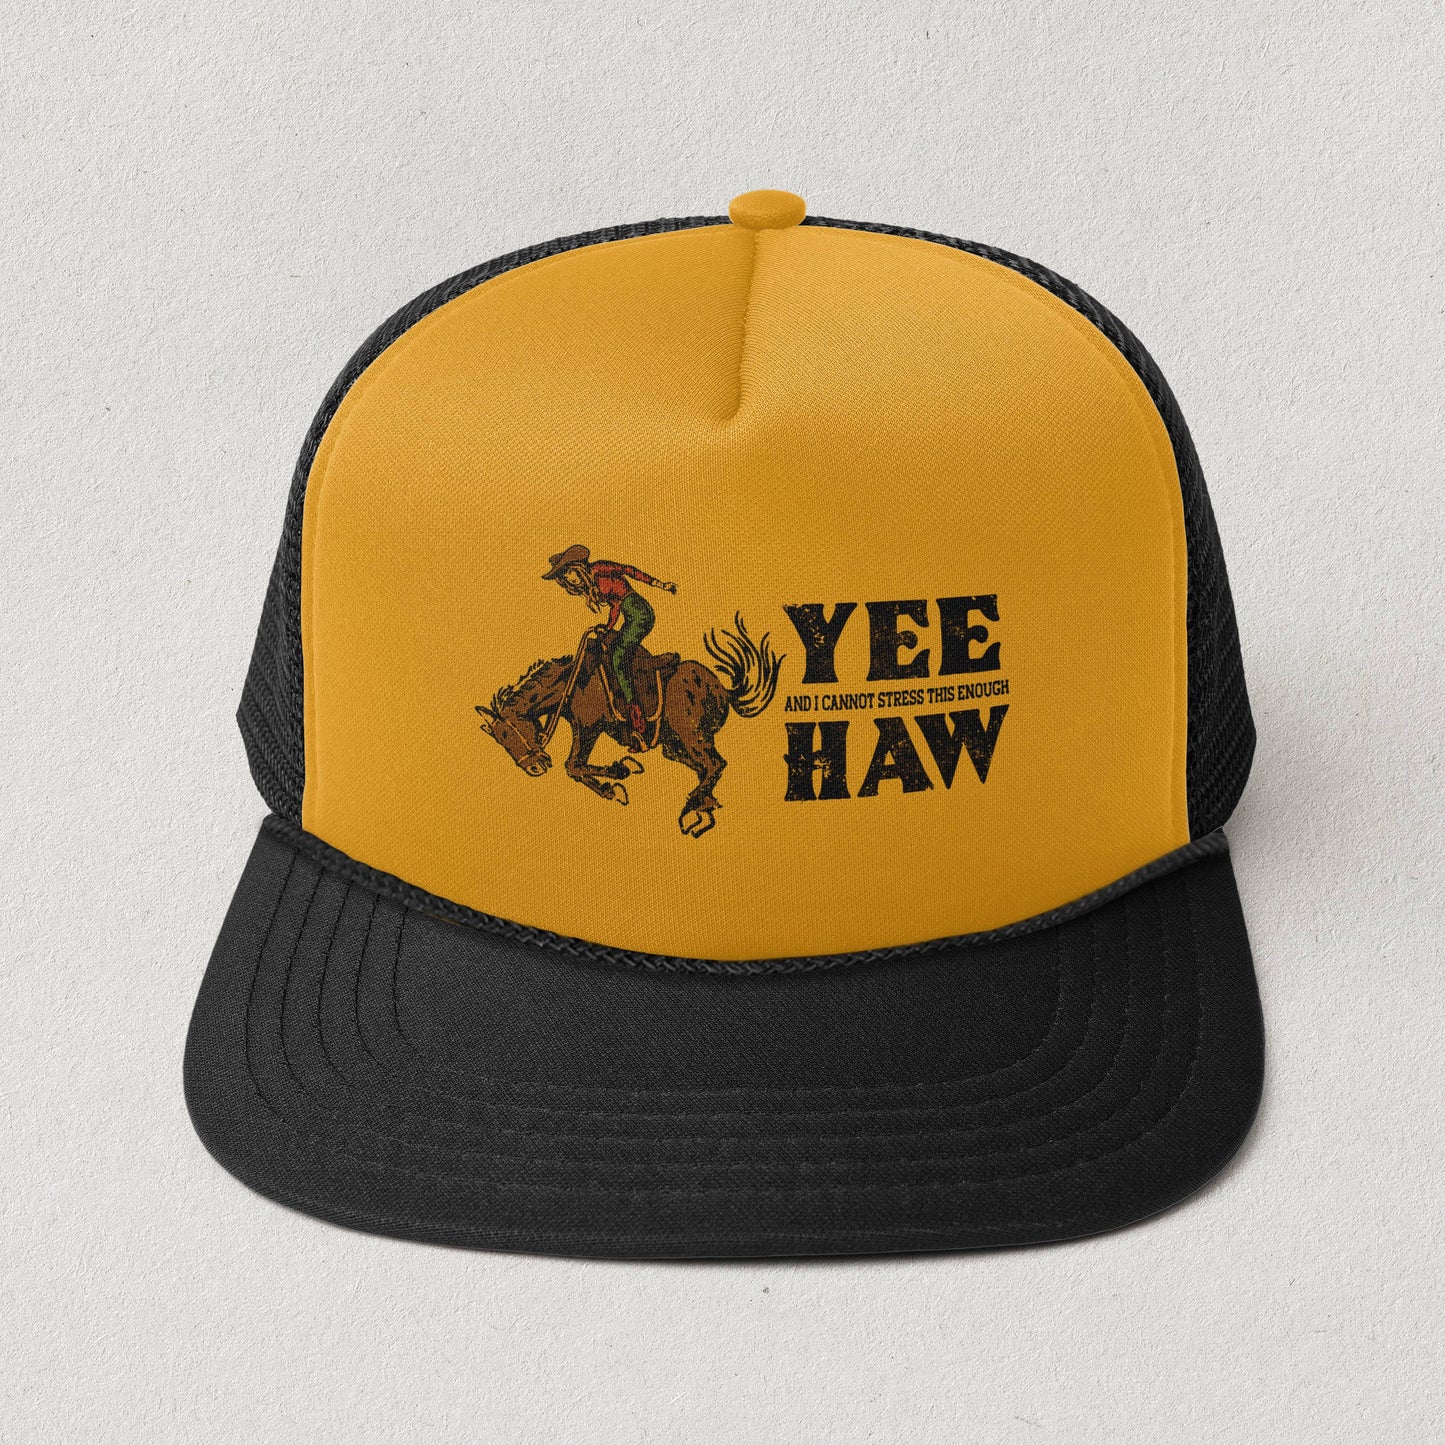 Cluster Funk Studio - Yee, and I Cannot Stress This Enough, Haw- Rodeo Trucker Hat